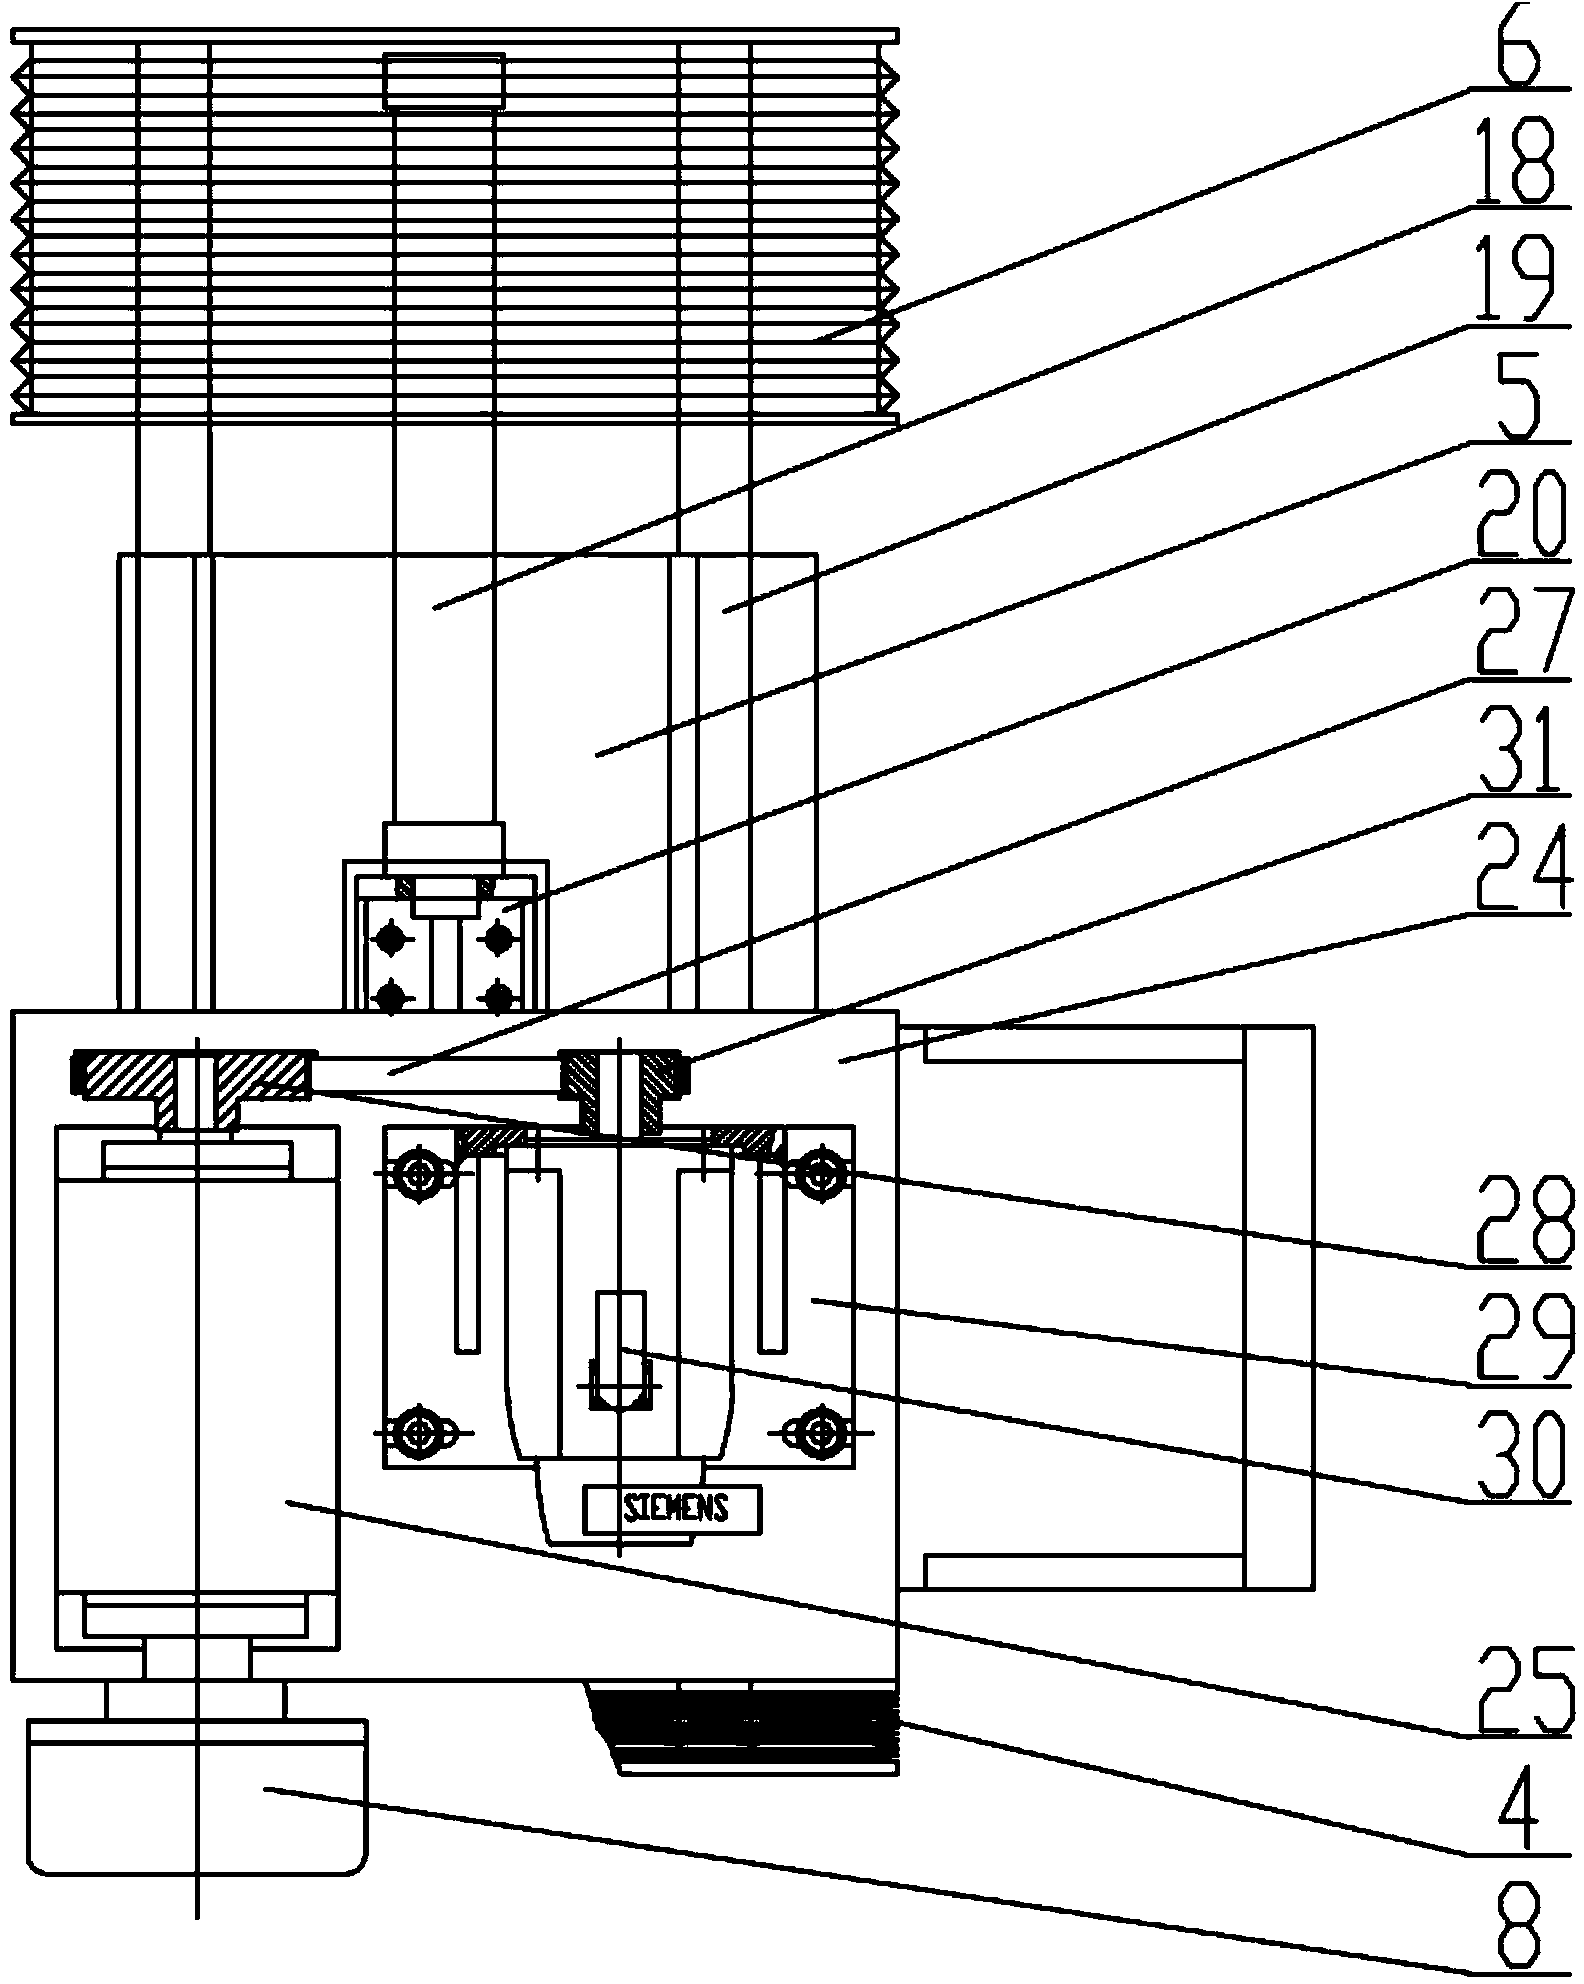 In-place finishing device and method for air bag polishing head